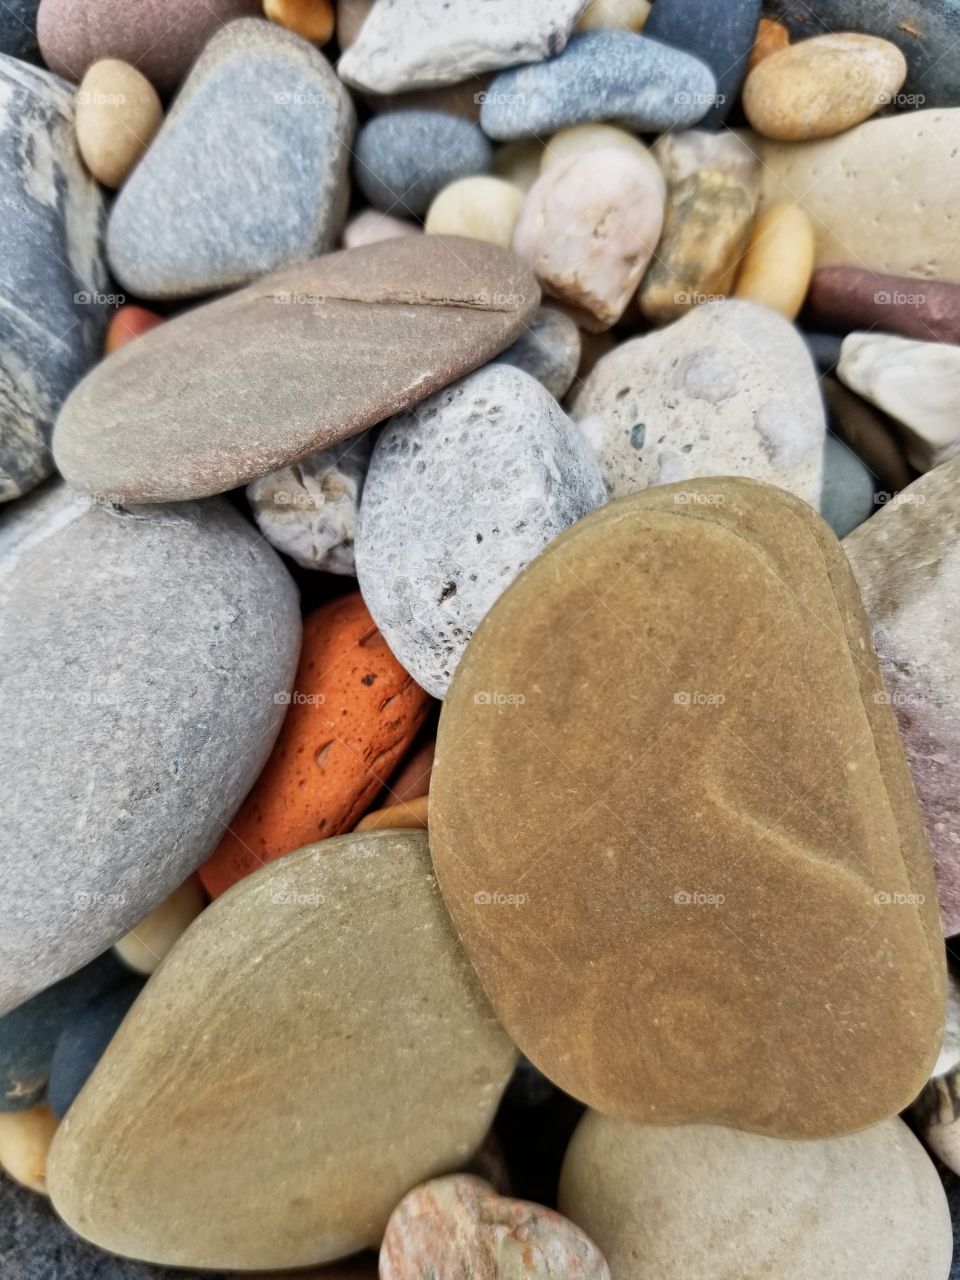 Beautiful soft ocean washed stones from the beach